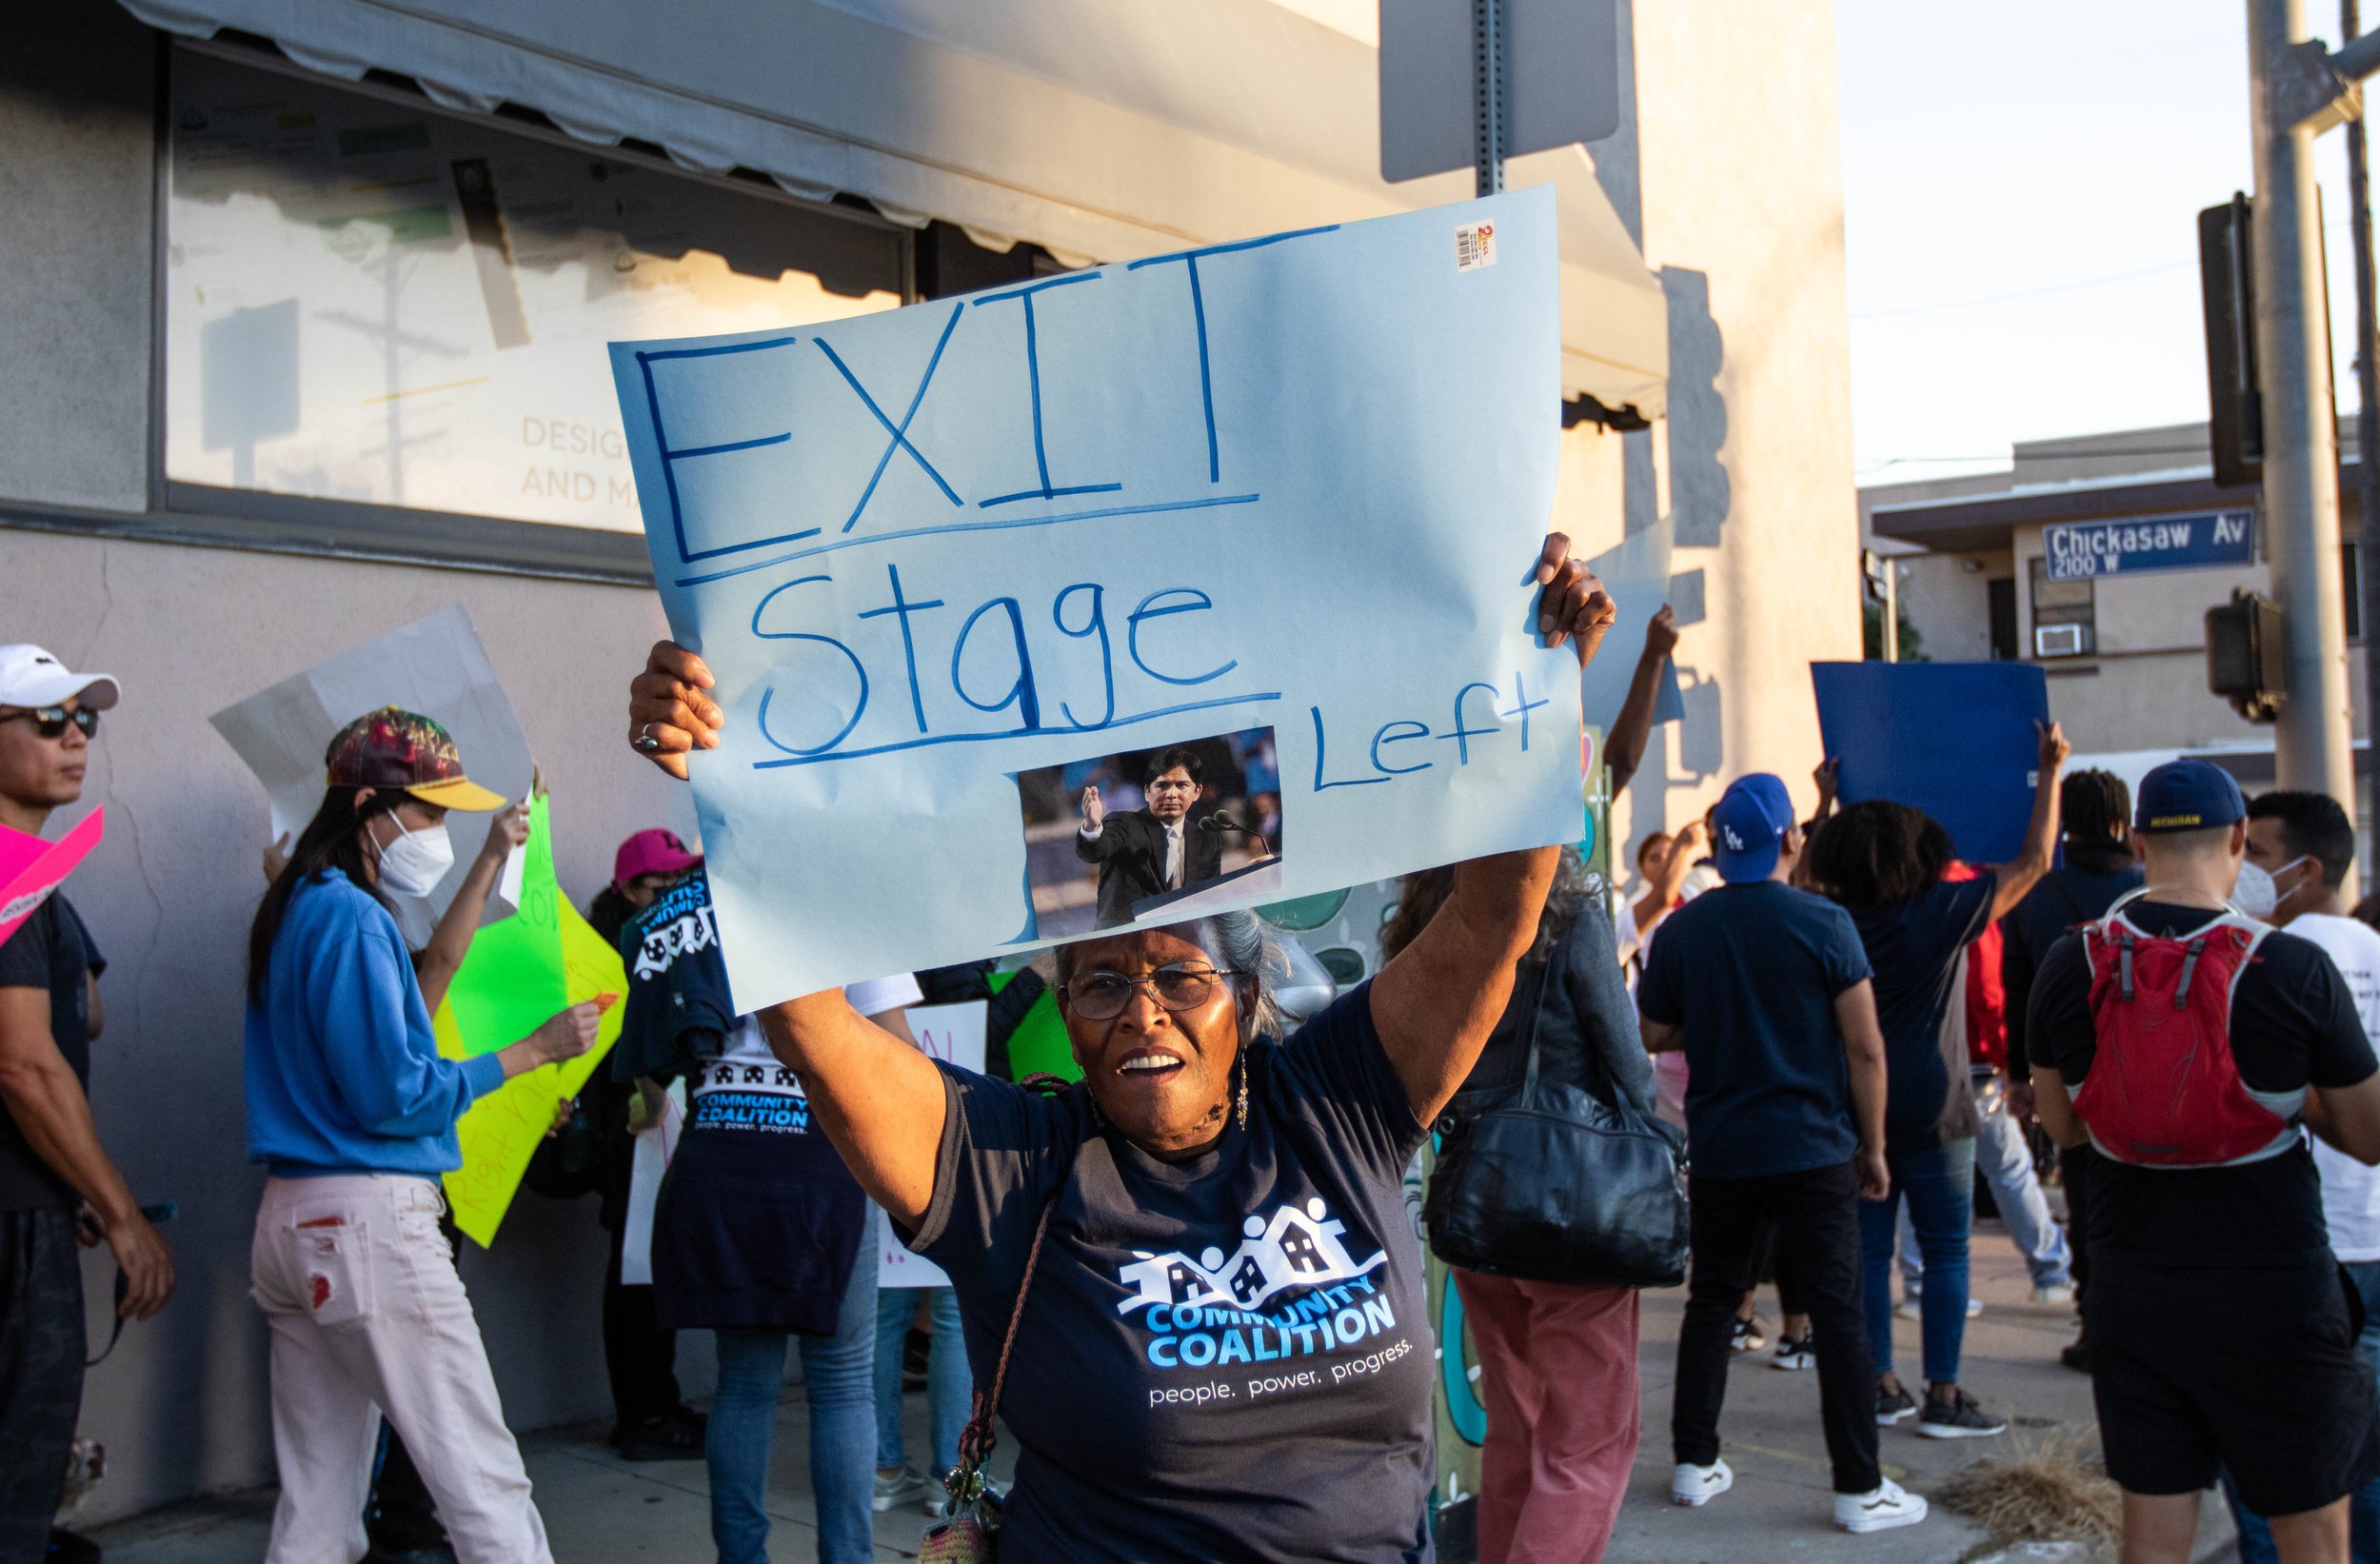  (L) Maria Isabel Rutledge holds a sign demanding León to "exit stage left", in response to the leaked audio tapes in Los Angeles City Hall, consisting of racist remarks from León and other LA council members. On Oct. 24, 2022, a rally of approximate